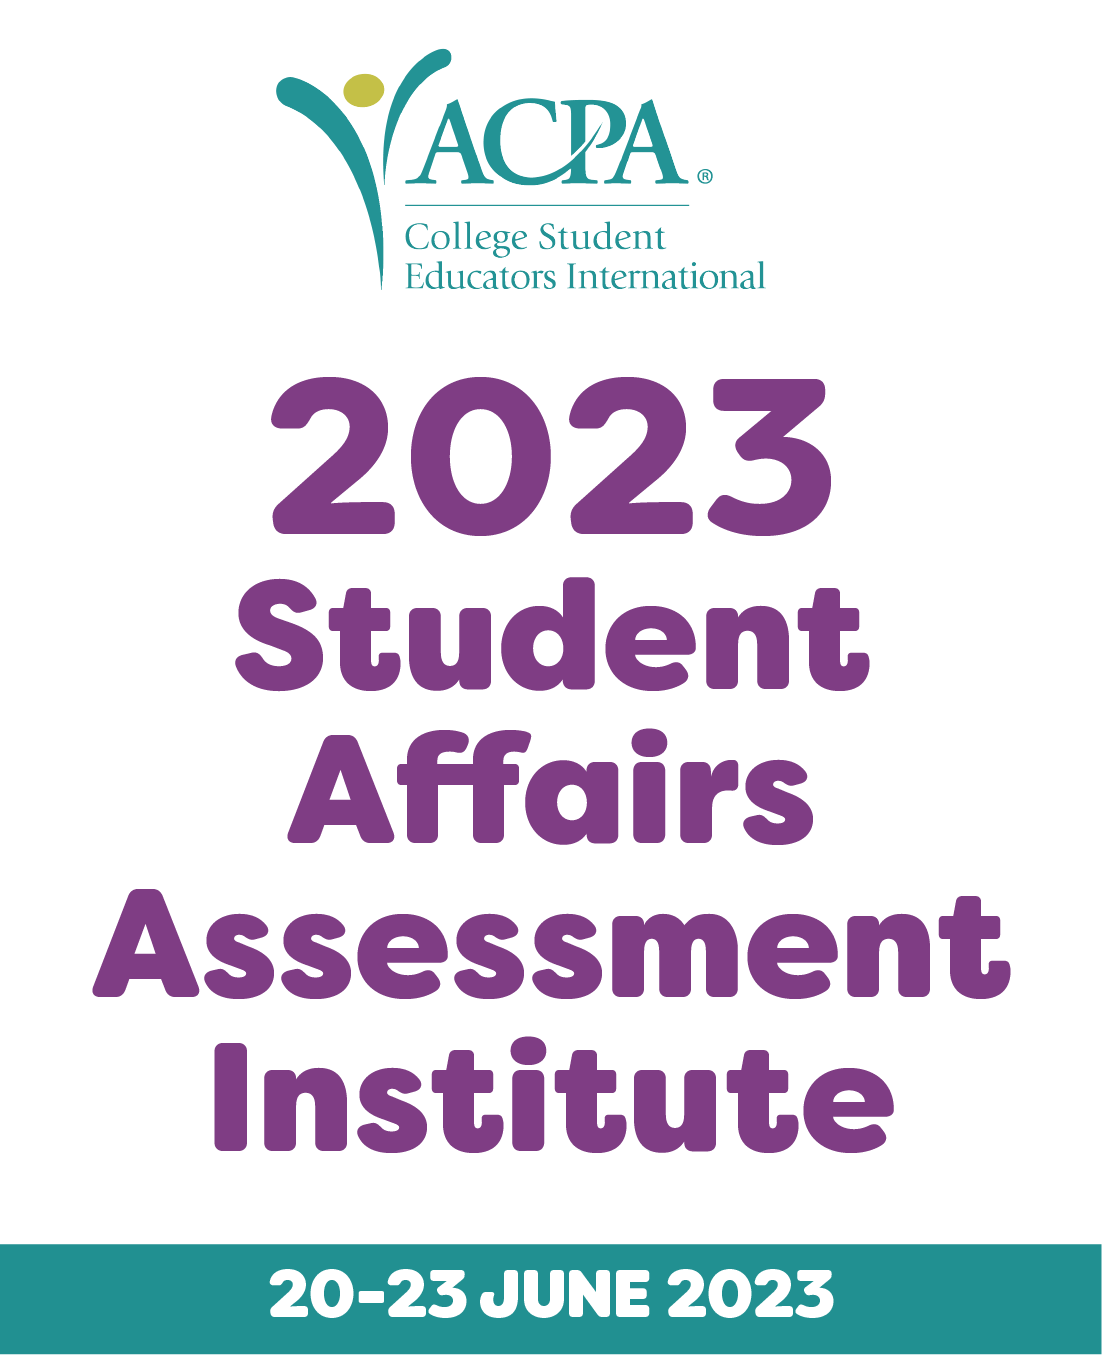 2023 Student Affairs Assessment Institute with ACPA logo